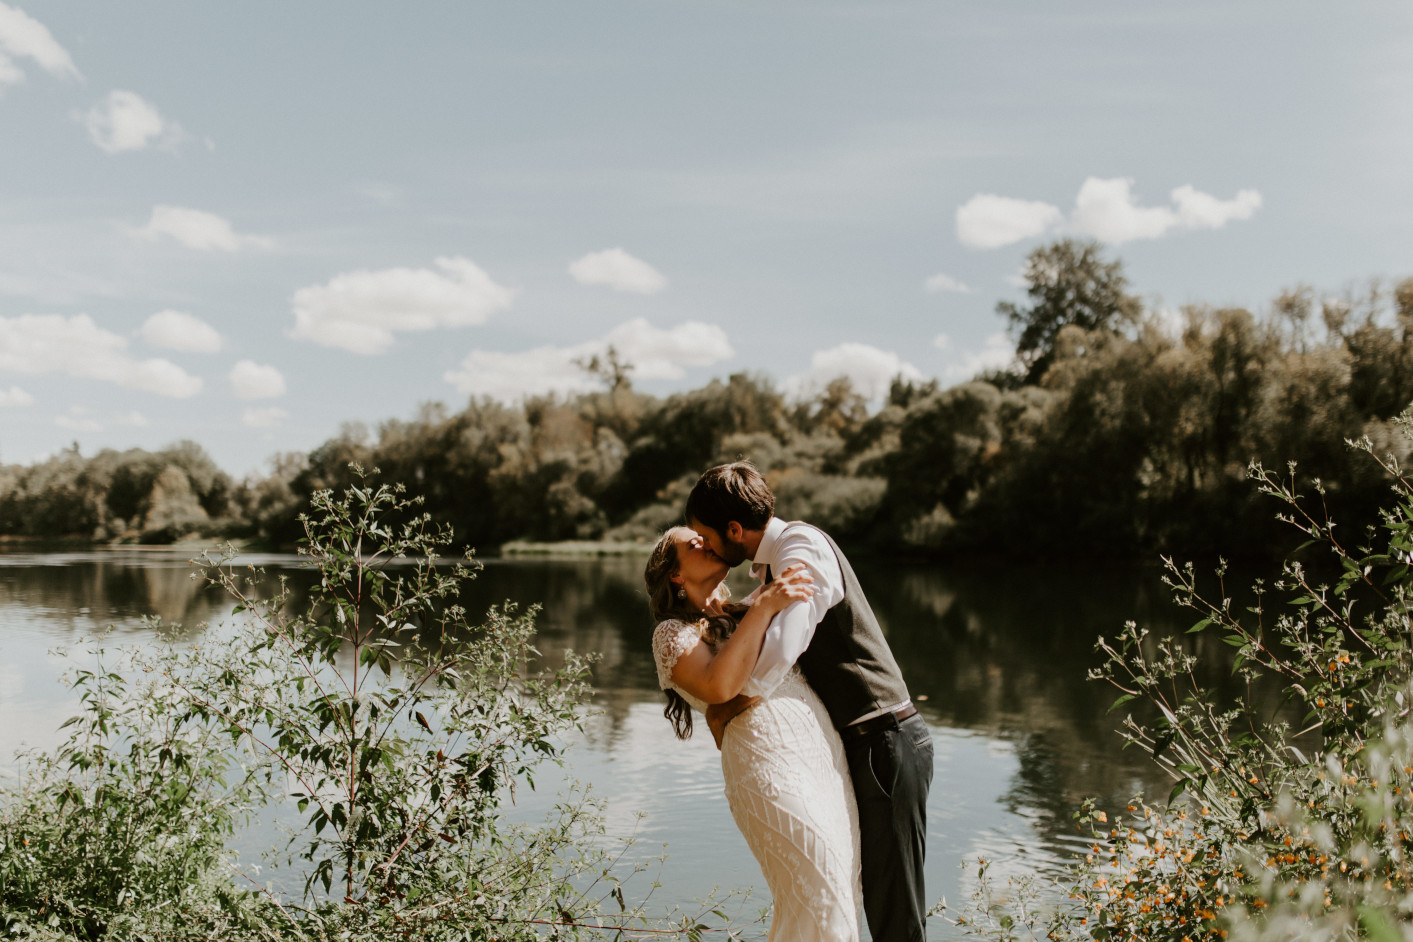 Hannah and Dan share a moment  in Corvallis, Oregon. Intimate wedding photography in Corvallis Oregon by Sienna Plus Josh.